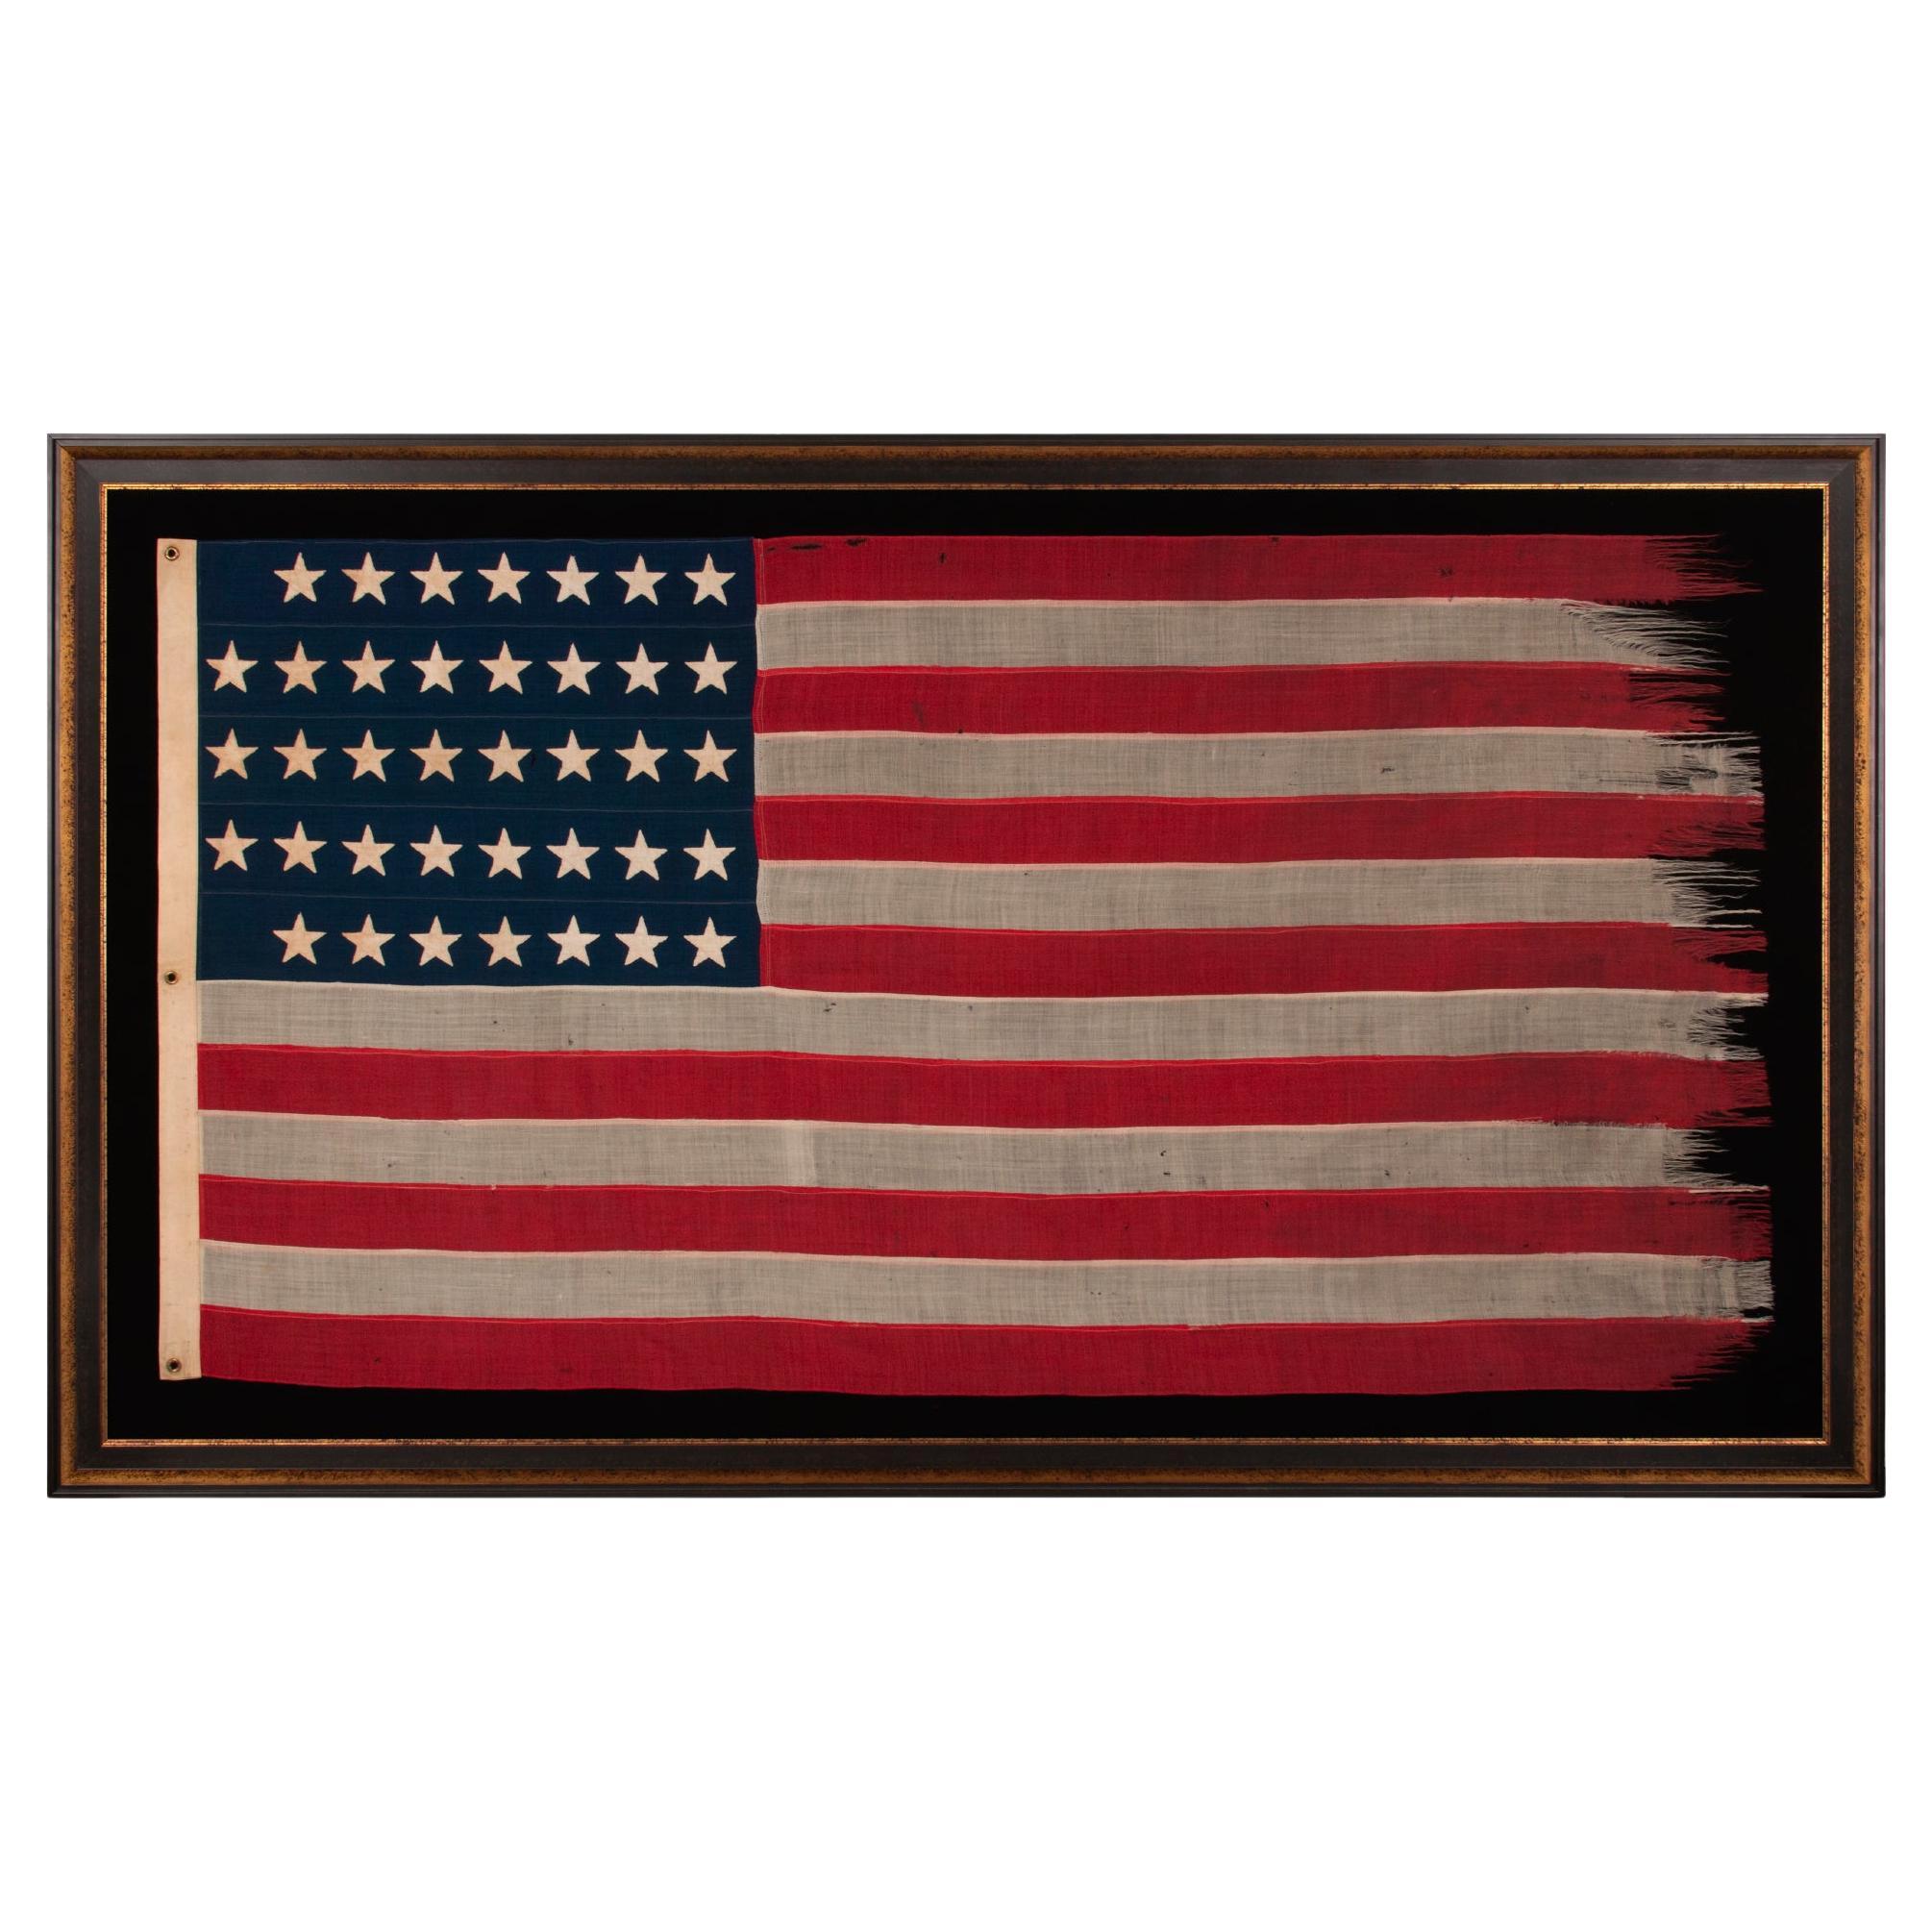 38 Star American Flag, Stars in Notched Pattern, ca 1876-1889